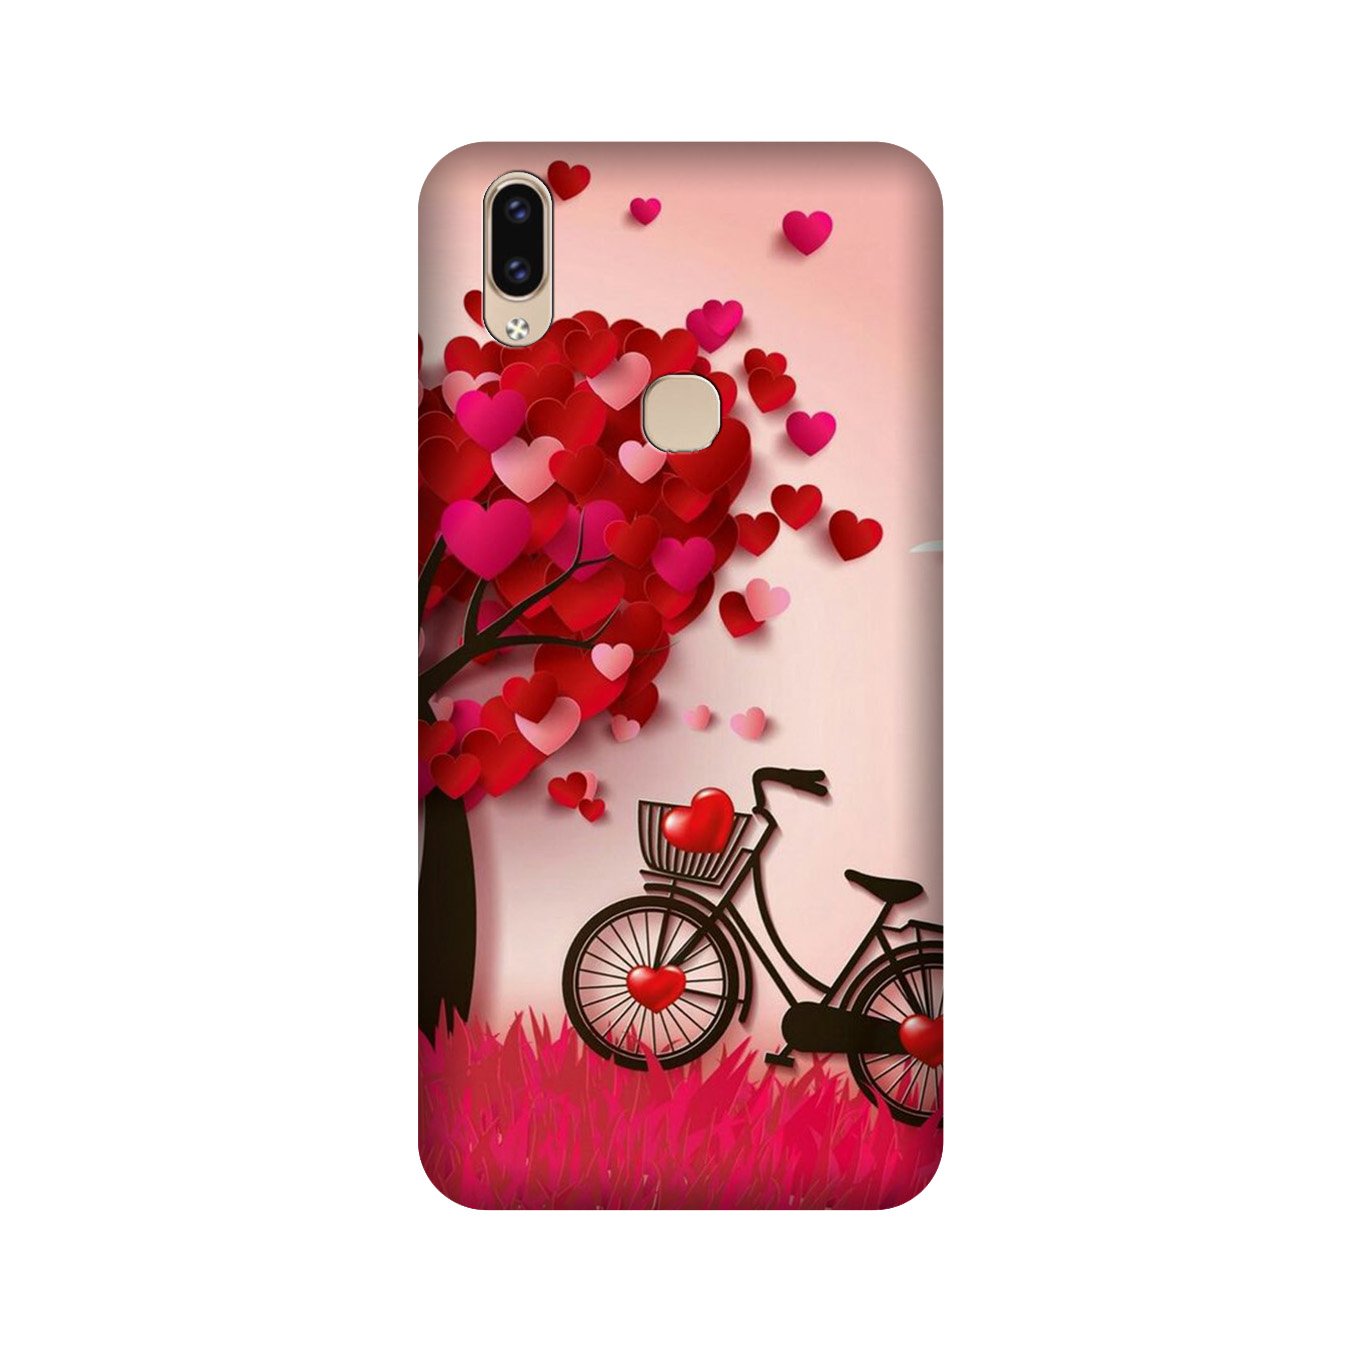 Red Heart Cycle Case for Vivo V9 pro (Design No. 222)